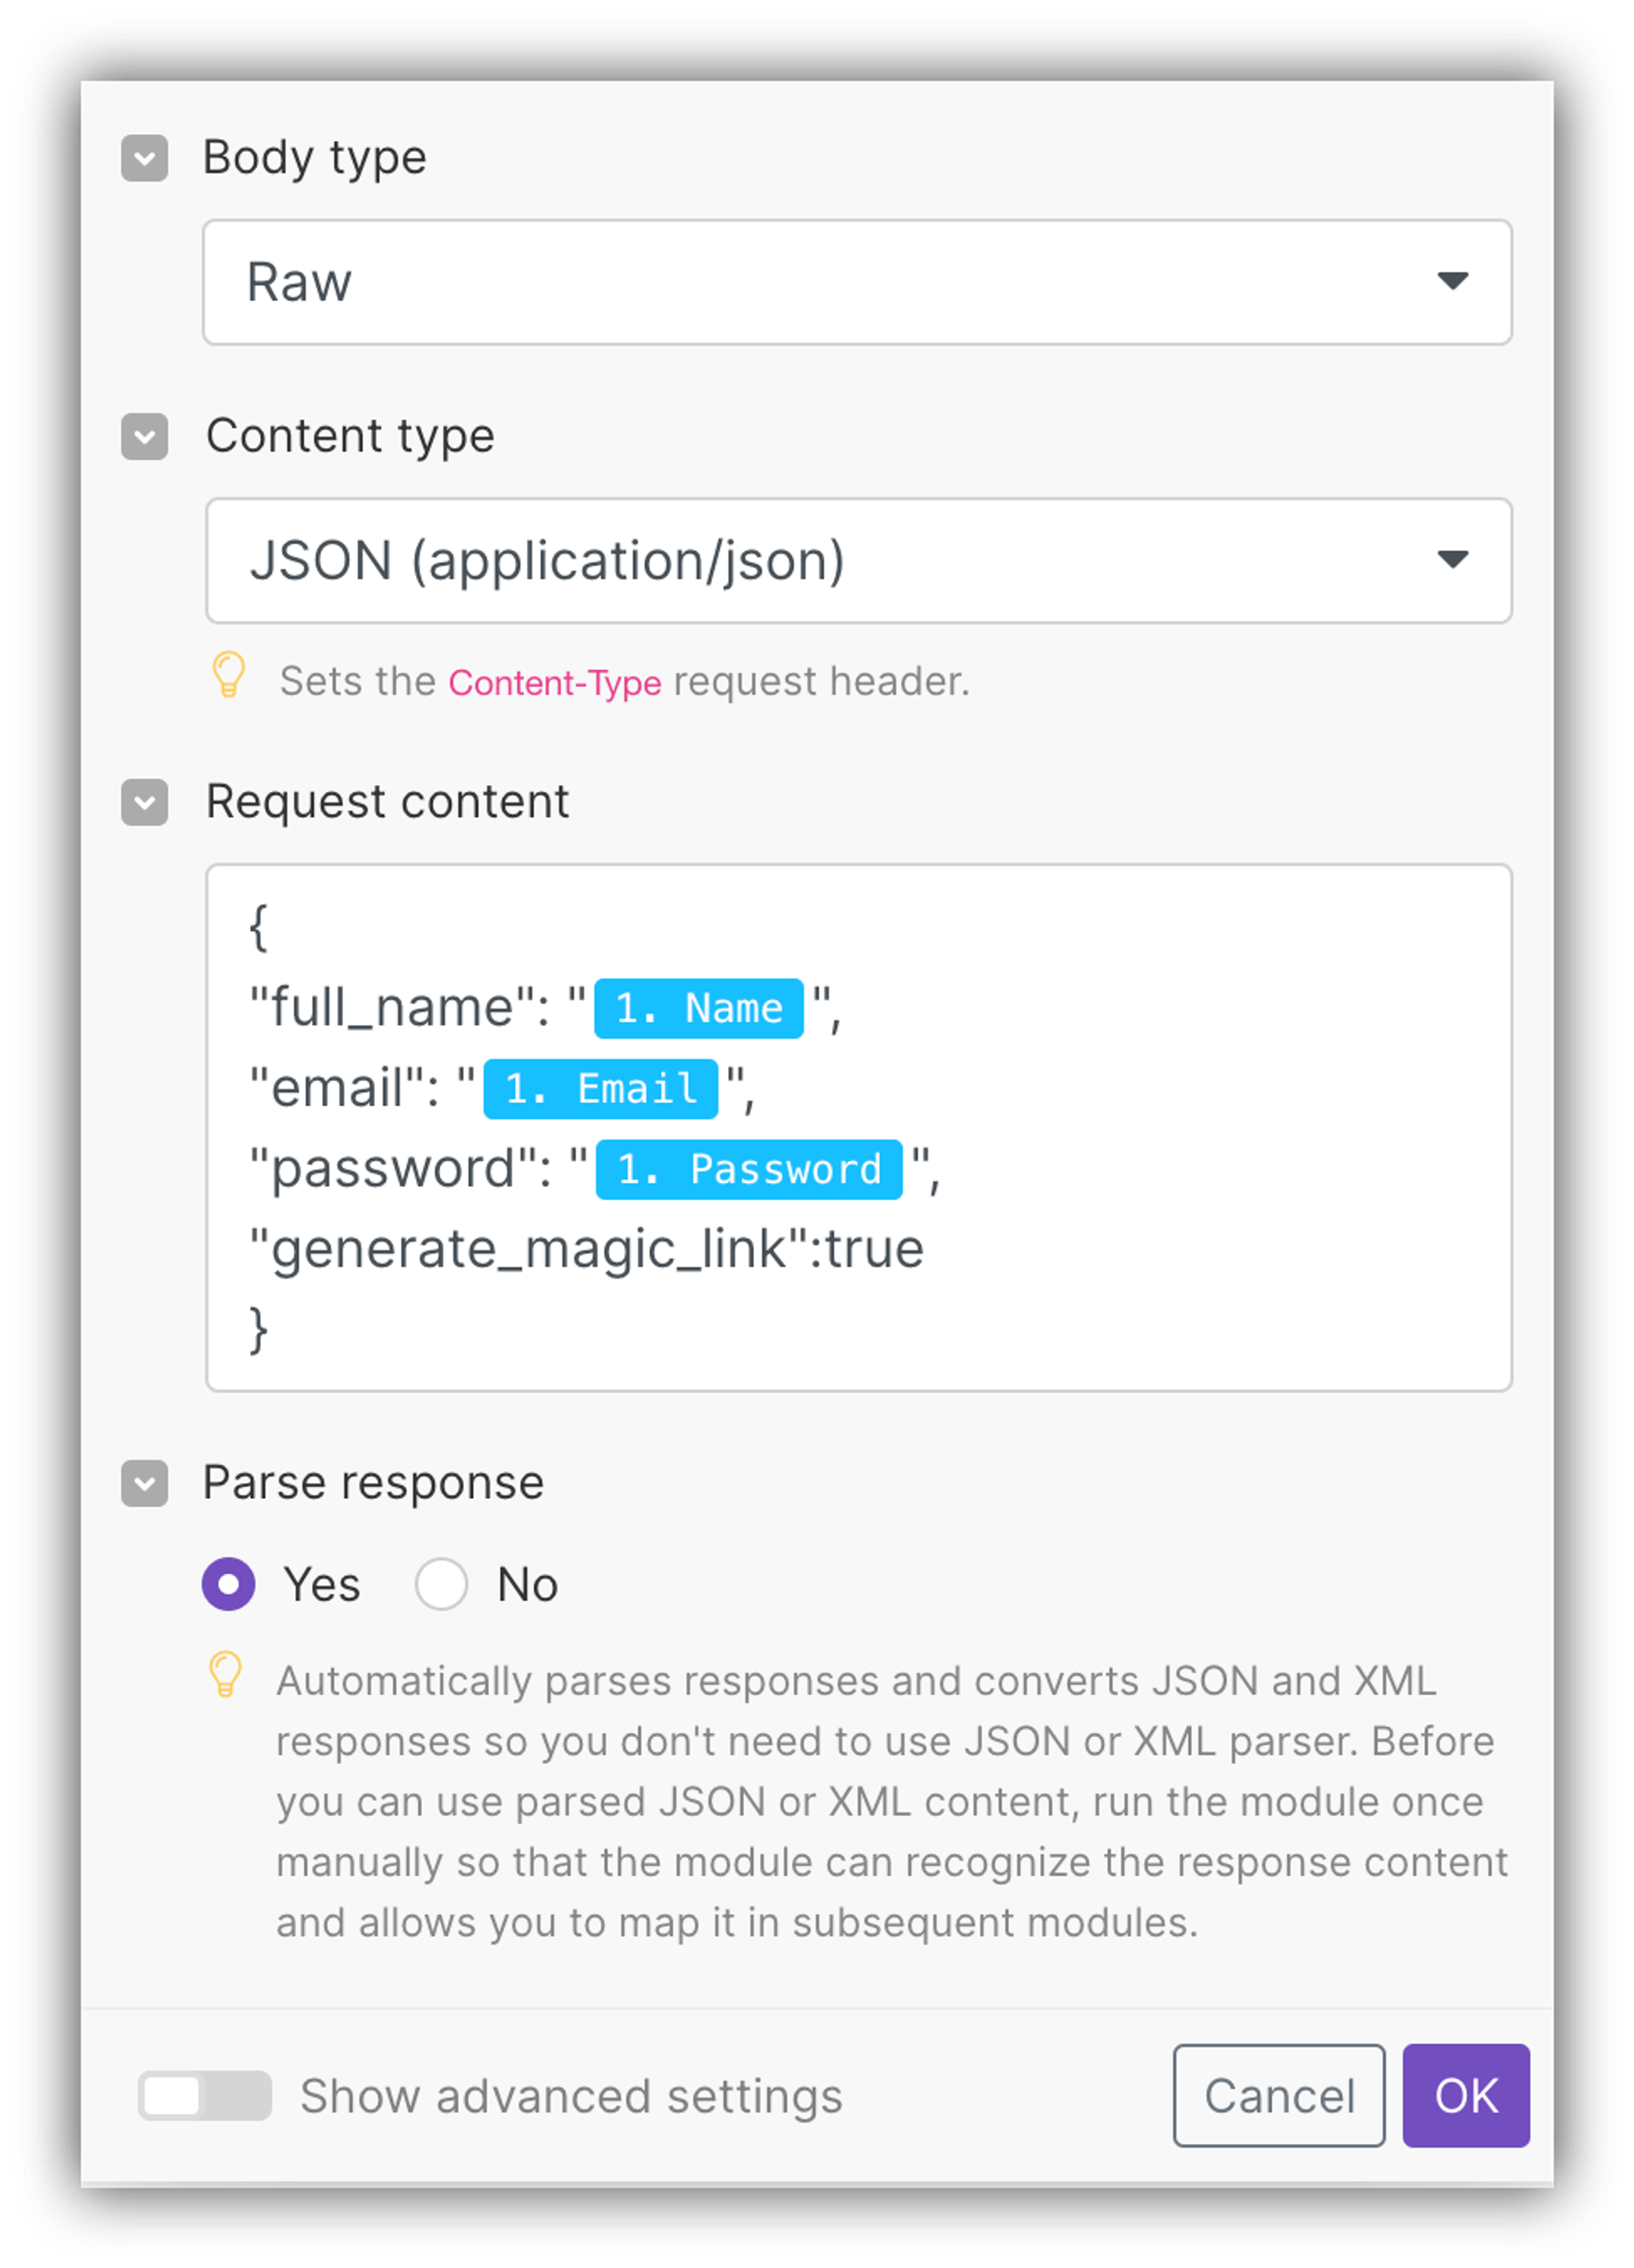 Configuring Body and Content types and adding Request content